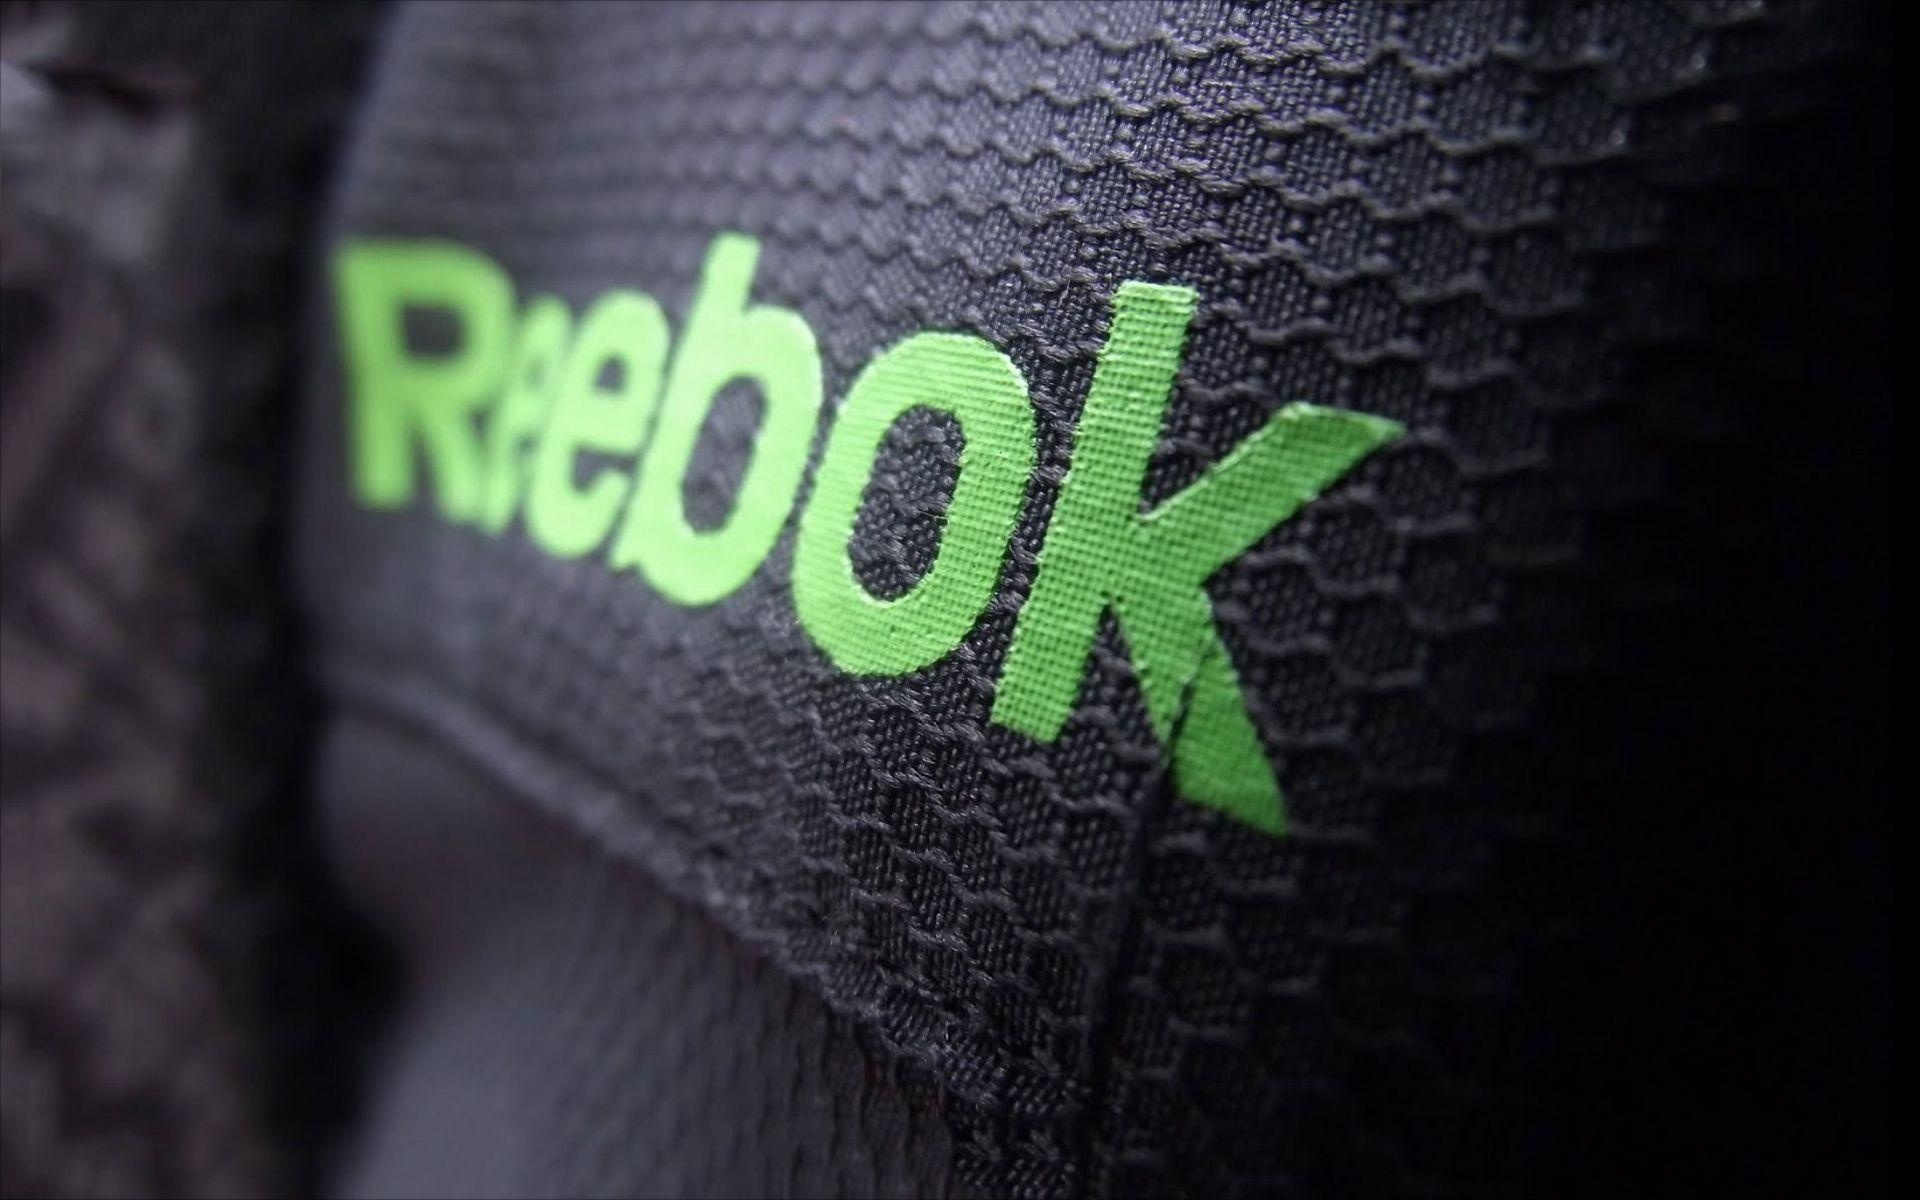 Reebok: The manufacturer of athletic and lifestyle footwear, apparel and equipment, Boston, Massachusetts. 1920x1200 HD Wallpaper.